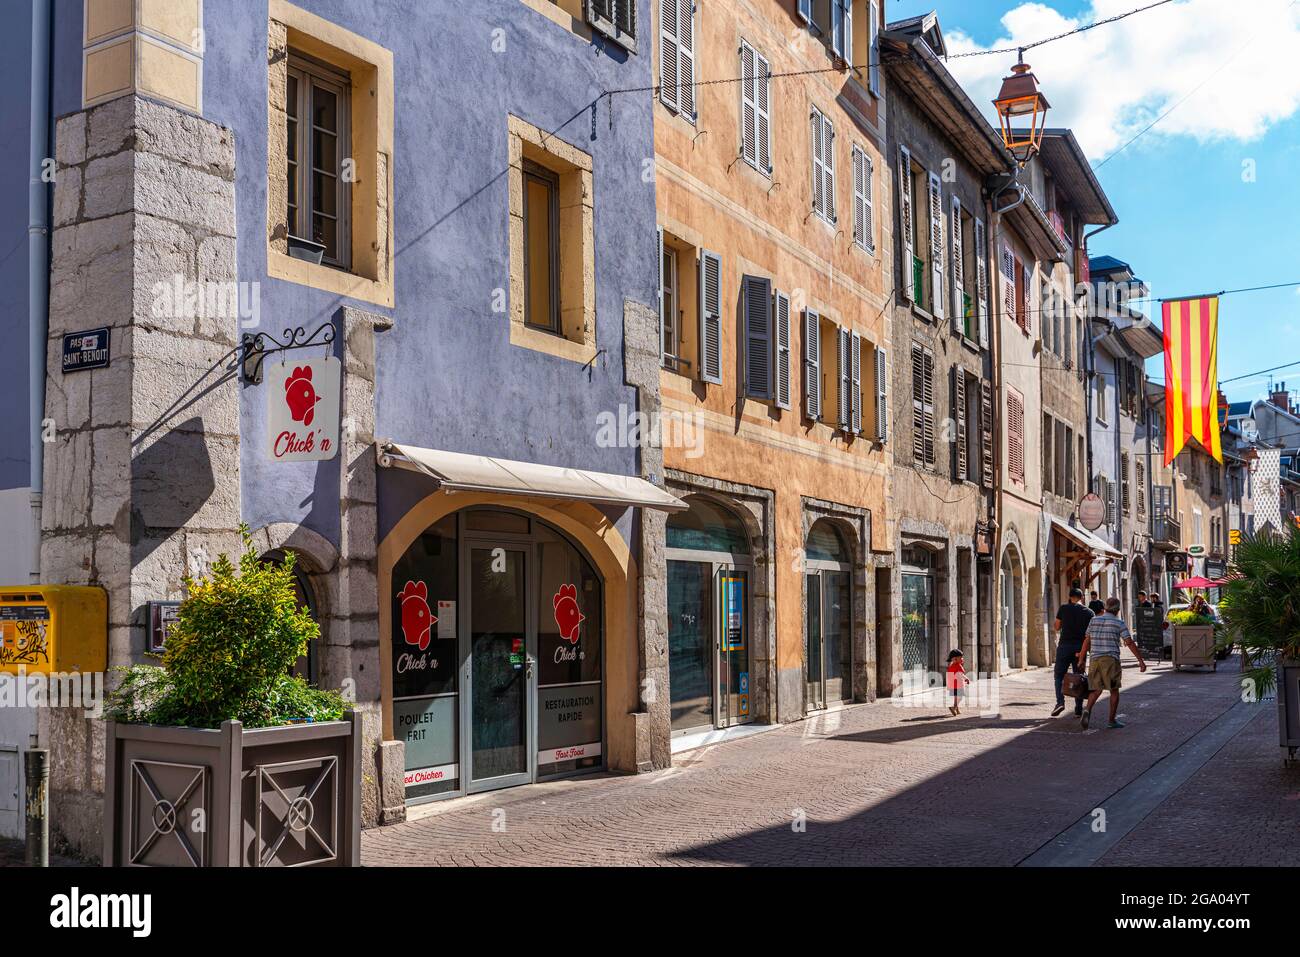 Old medieval houses renovated with shops and businesses in the Montmélian faubourg. Chambery, Auvergne-Rhône-Alpes region, Savoy, France Stock Photo